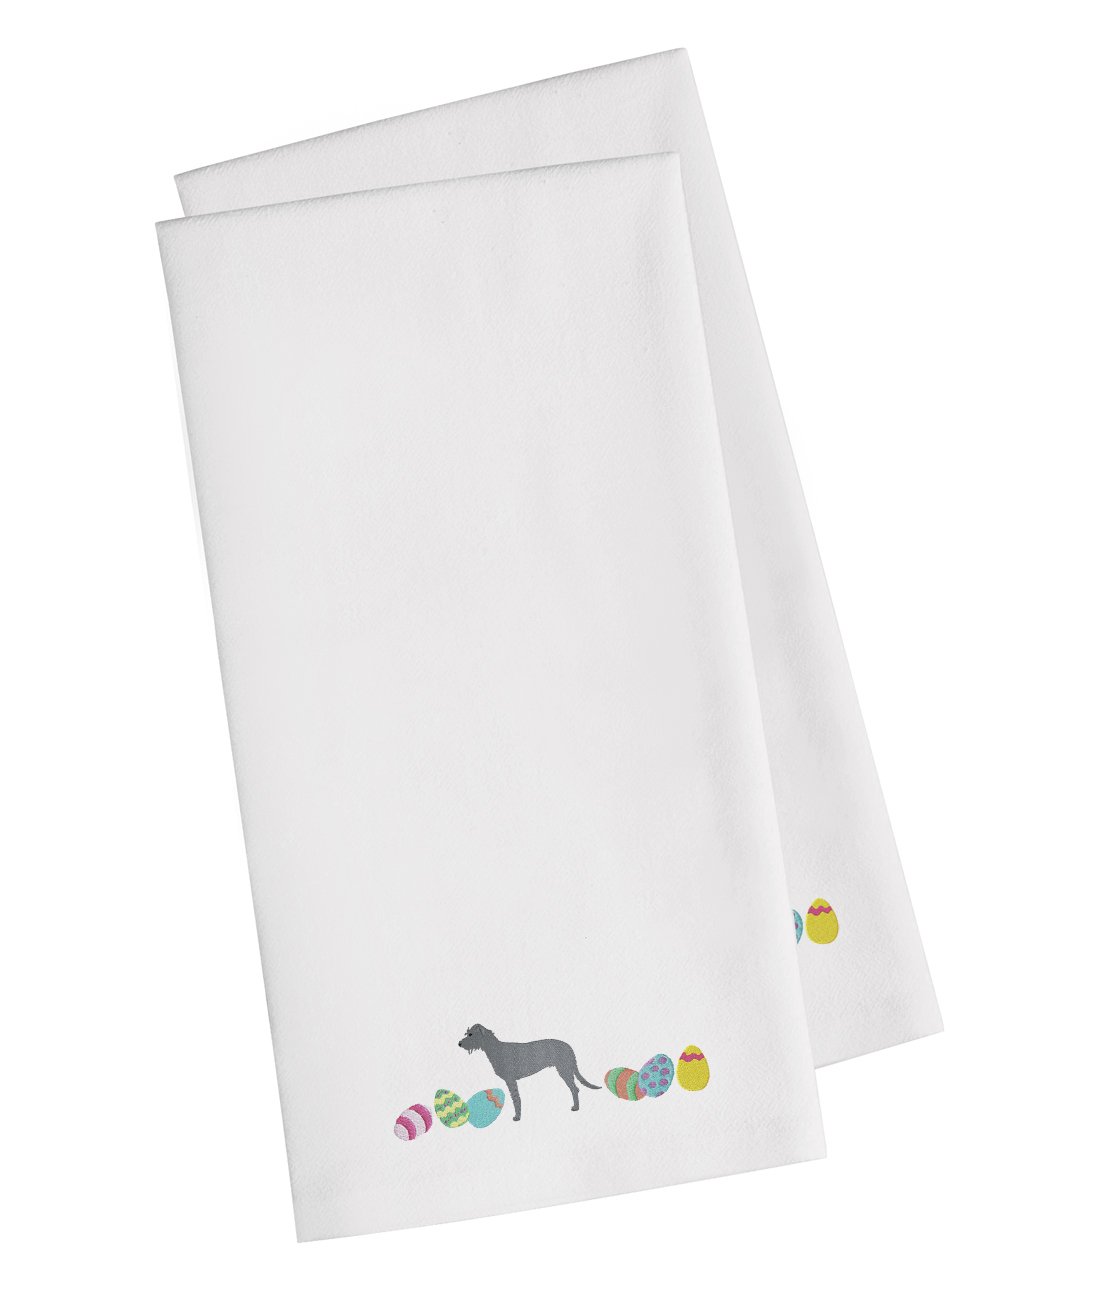 Irish Wolfhound Easter White Embroidered Kitchen Towel Set of 2 CK1653WHTWE by Caroline's Treasures